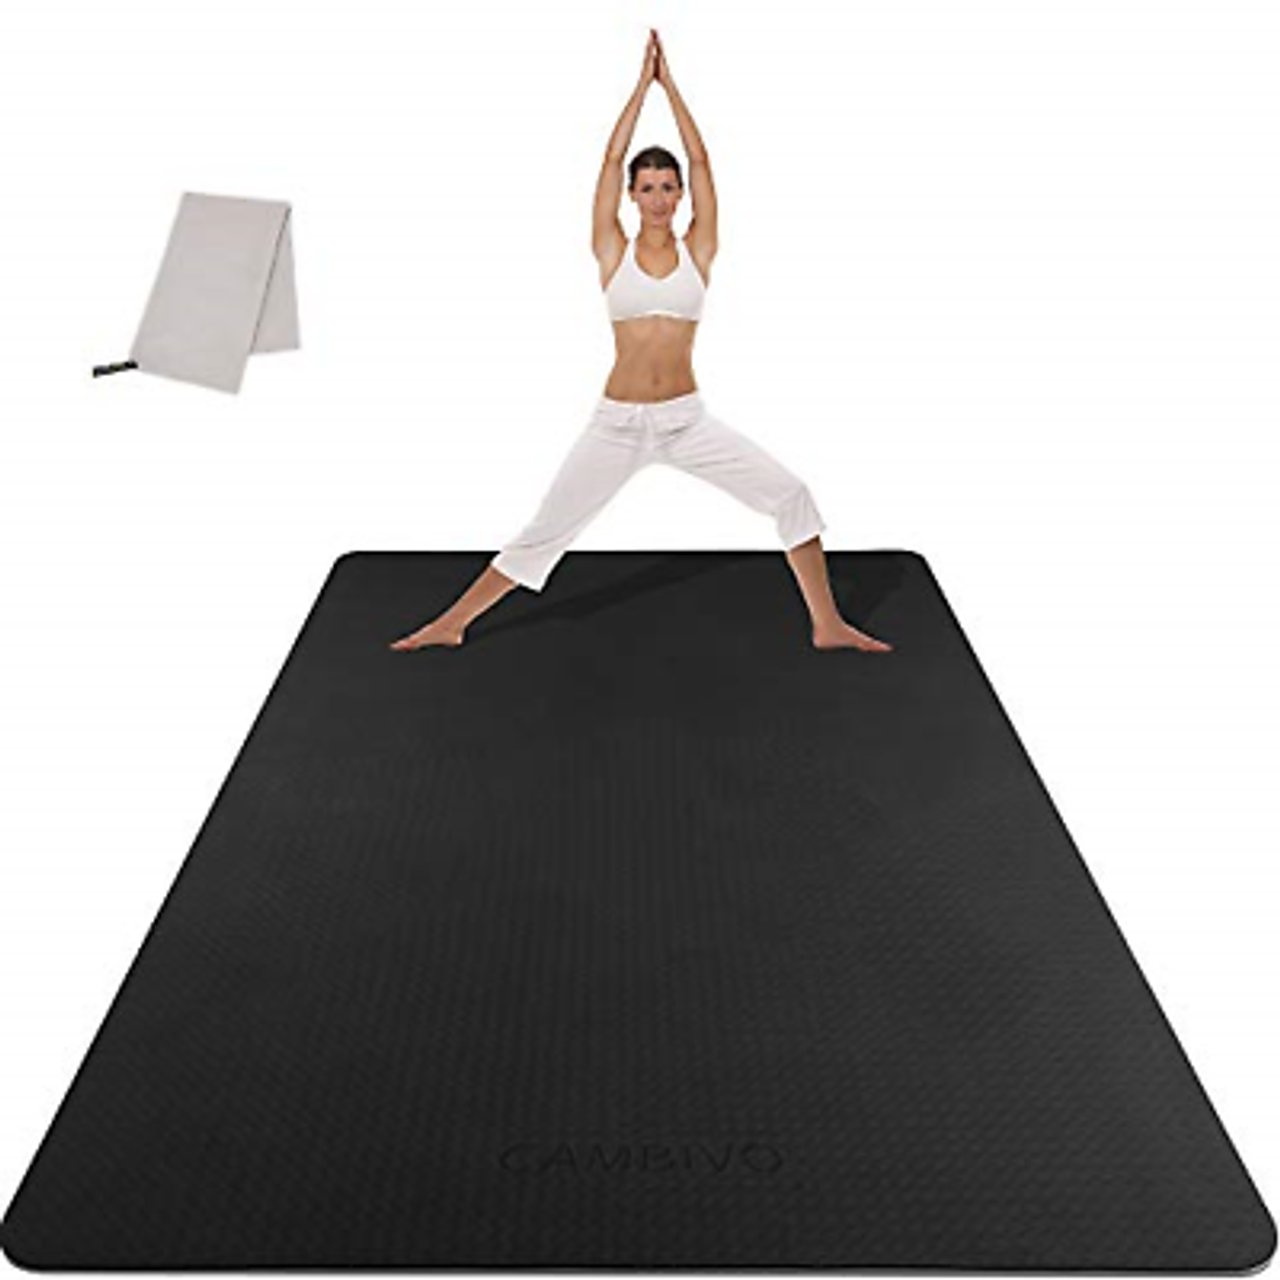 CAMBIVO Large Yoga Mat (6'x 4') Extra Wide Workout Mat for Men and Women  1/3 &1/4 Thick Exercise Fitness TPE Mat for Home Gym Yoga Pilates Workout